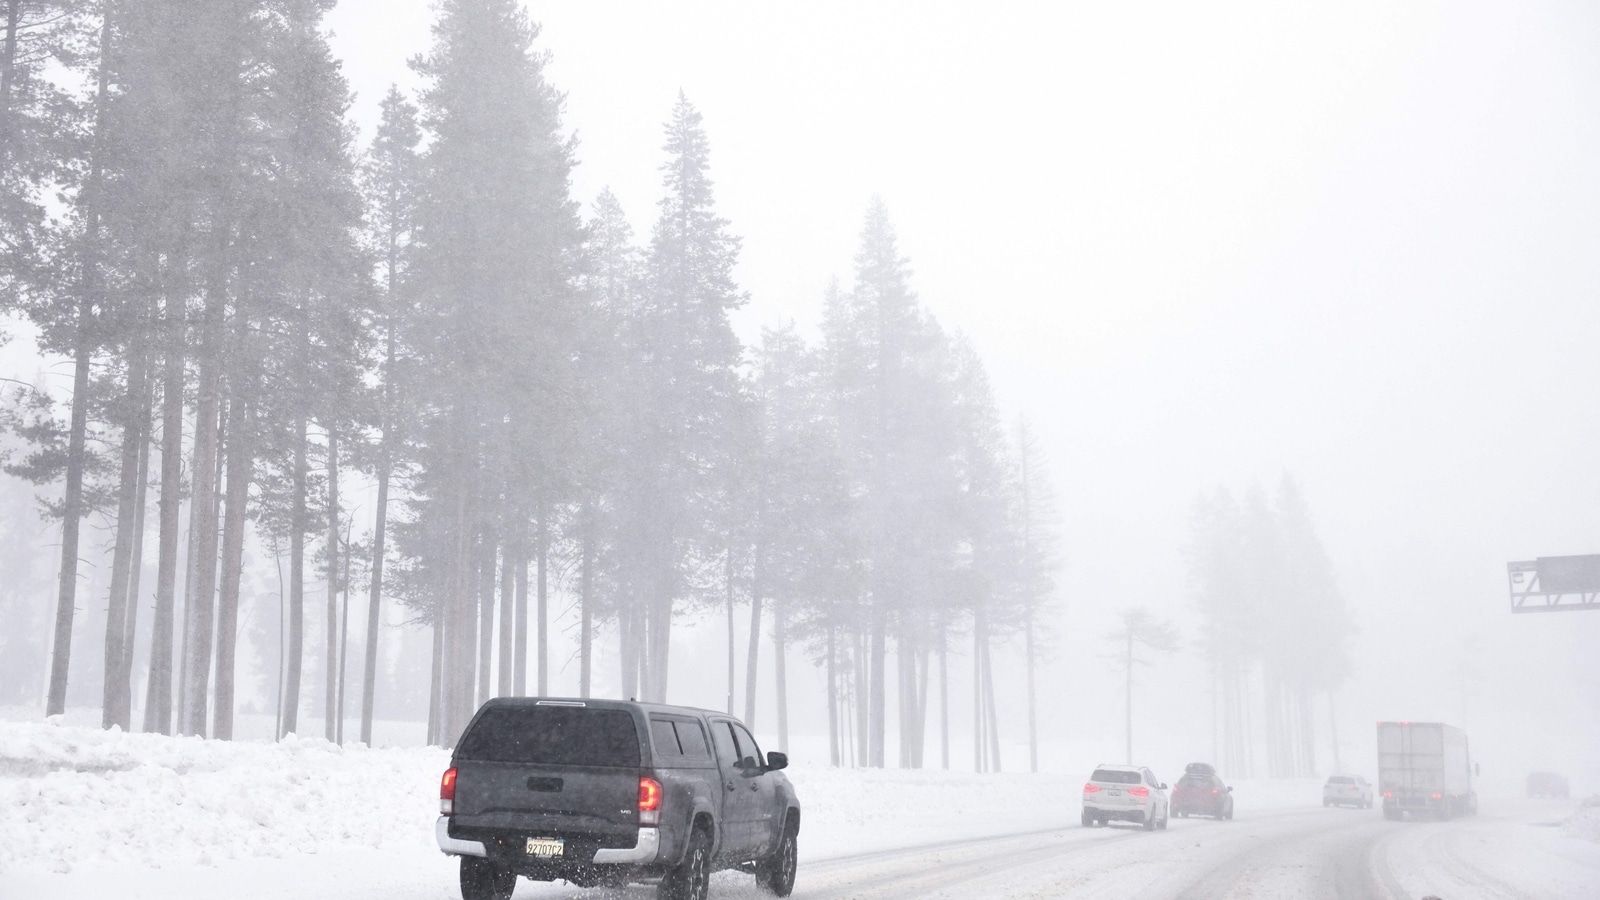 Massive Pacific Storm threatens Sierra Nevada, travel restrictions imposed on Interstate 80 between Reno and Sacramento